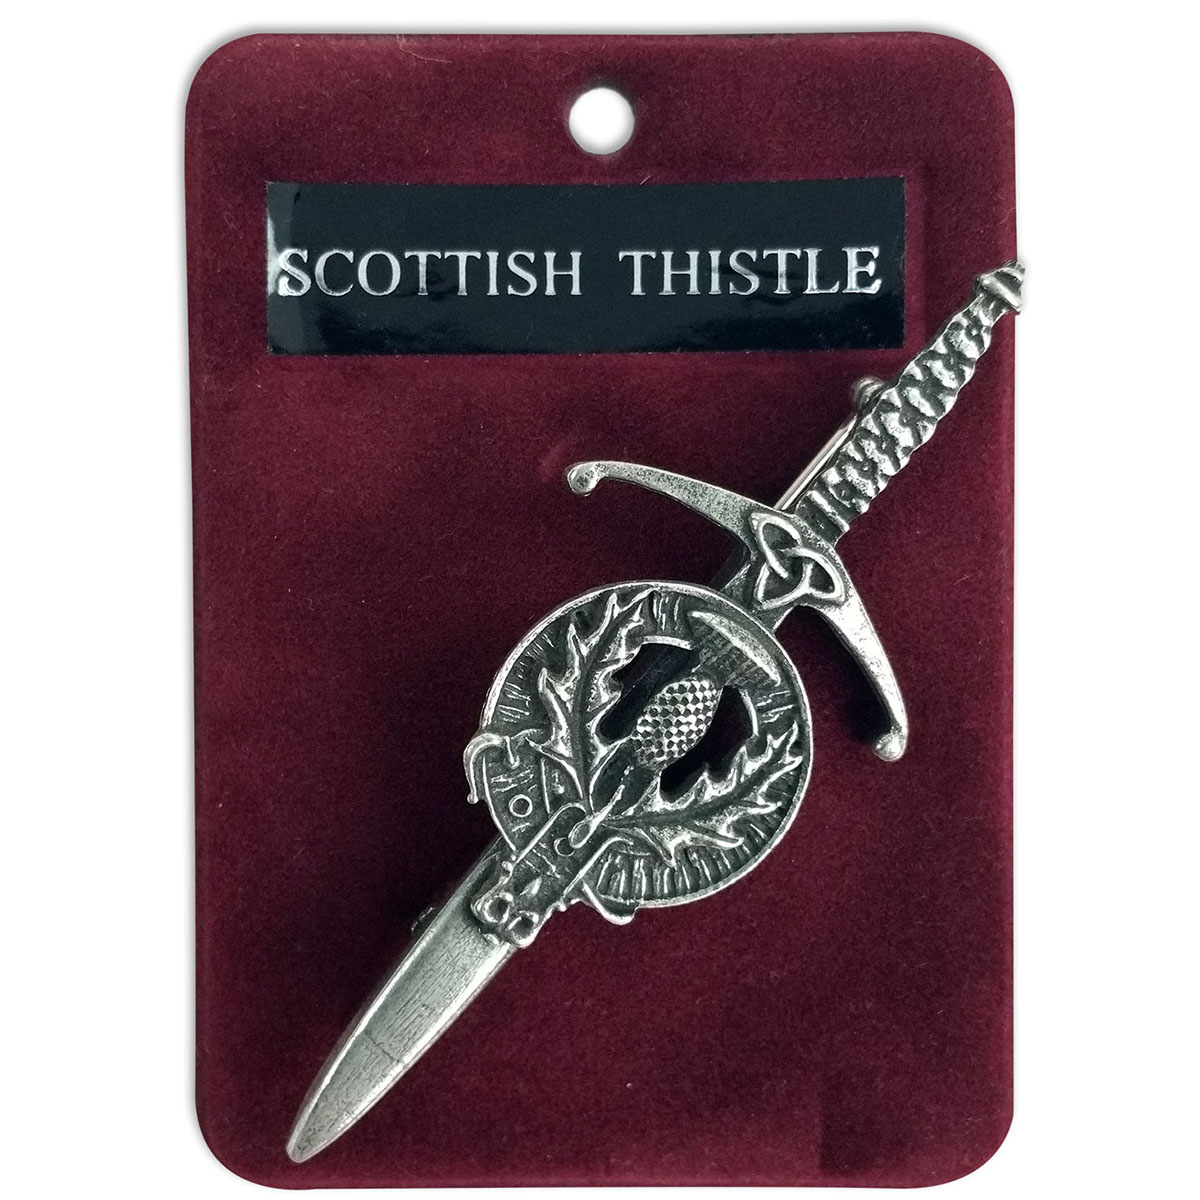 KILT PIN CELTIC CLAYMORE THISTLE SHIELD SOLID PEWTER MADE IN SCOTLAND KILTS NEW 